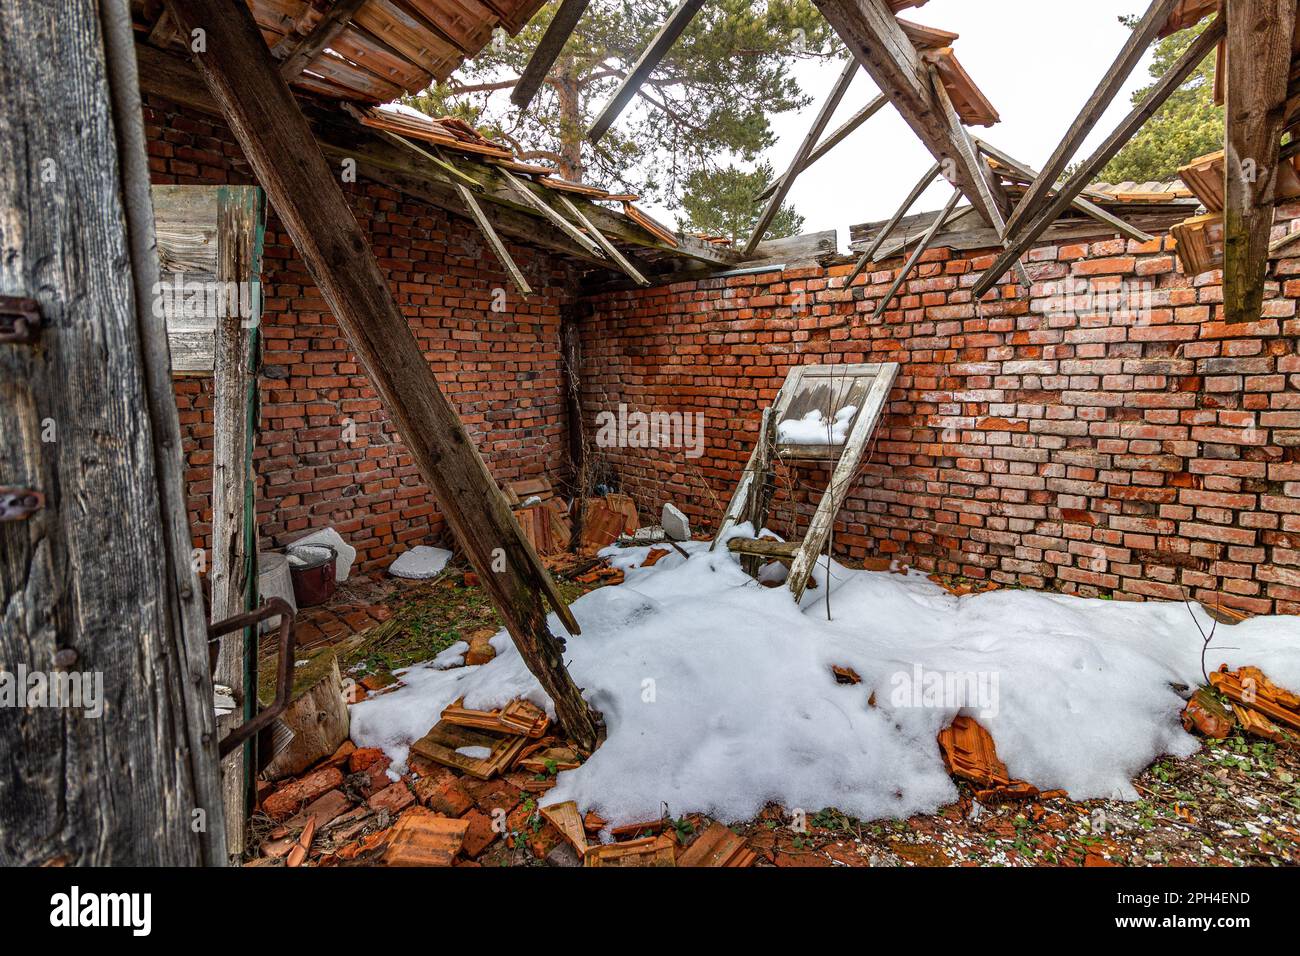 A broken window is visible leaning against a brick wall of a ruined building. Stock Photo